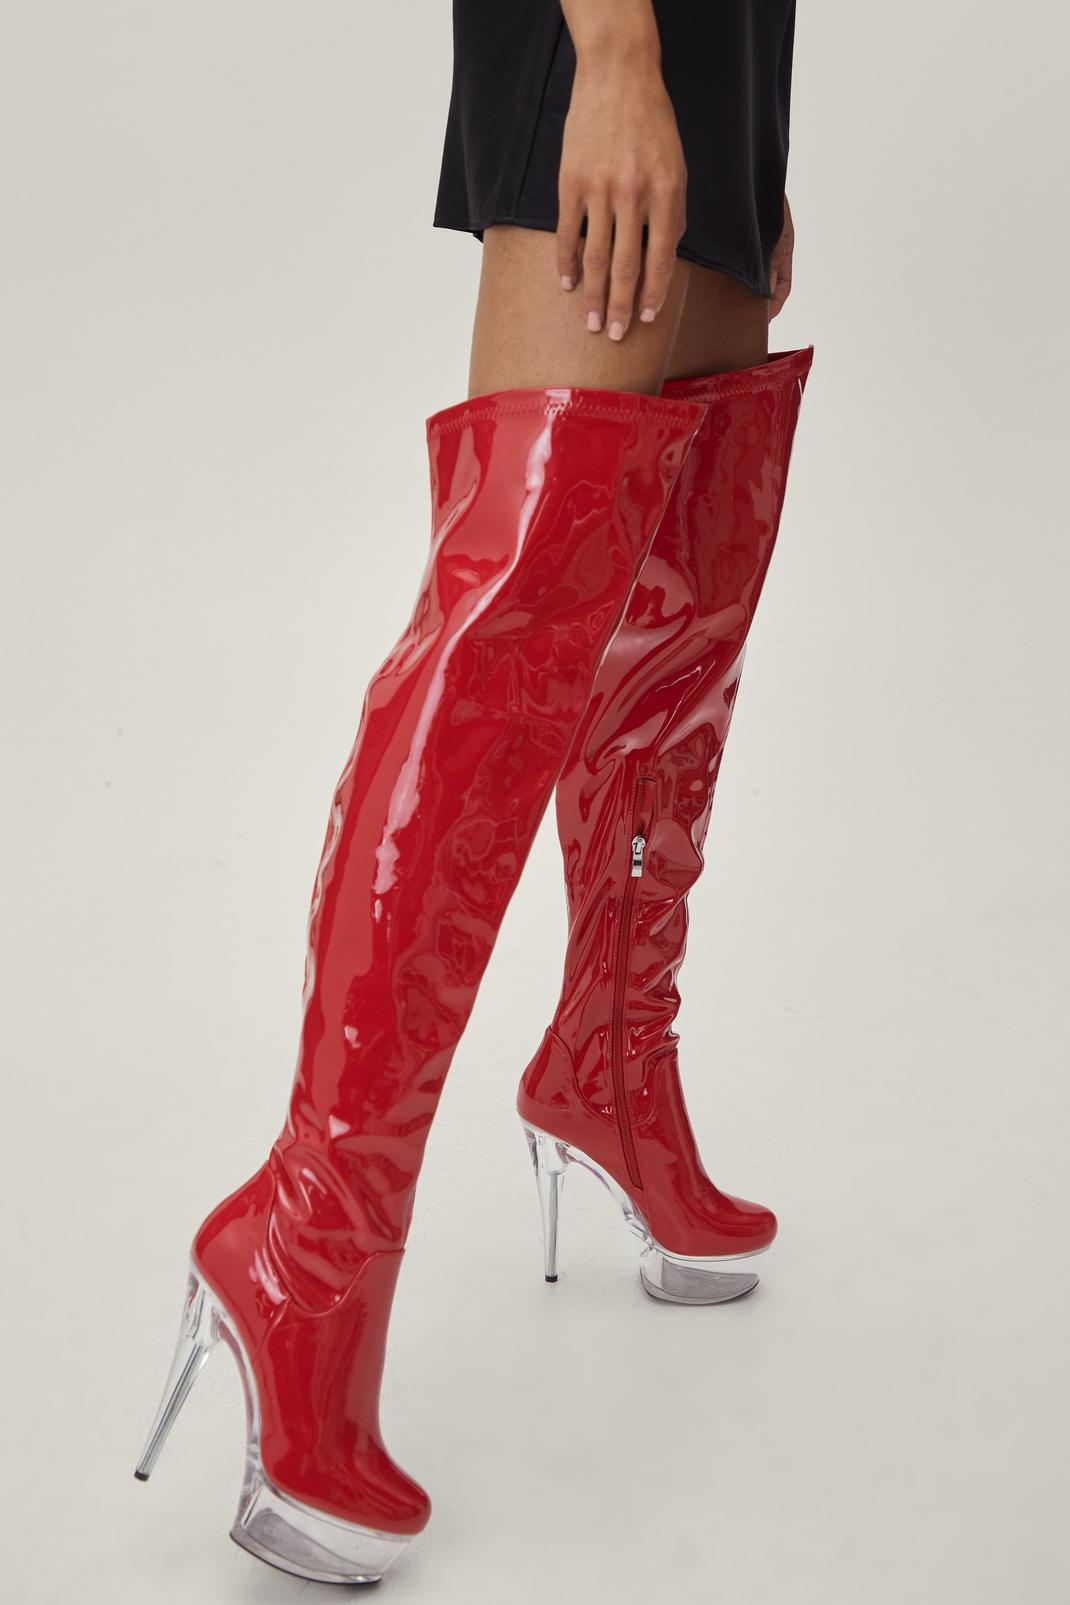 Patent Thigh High Clear Heels Boots